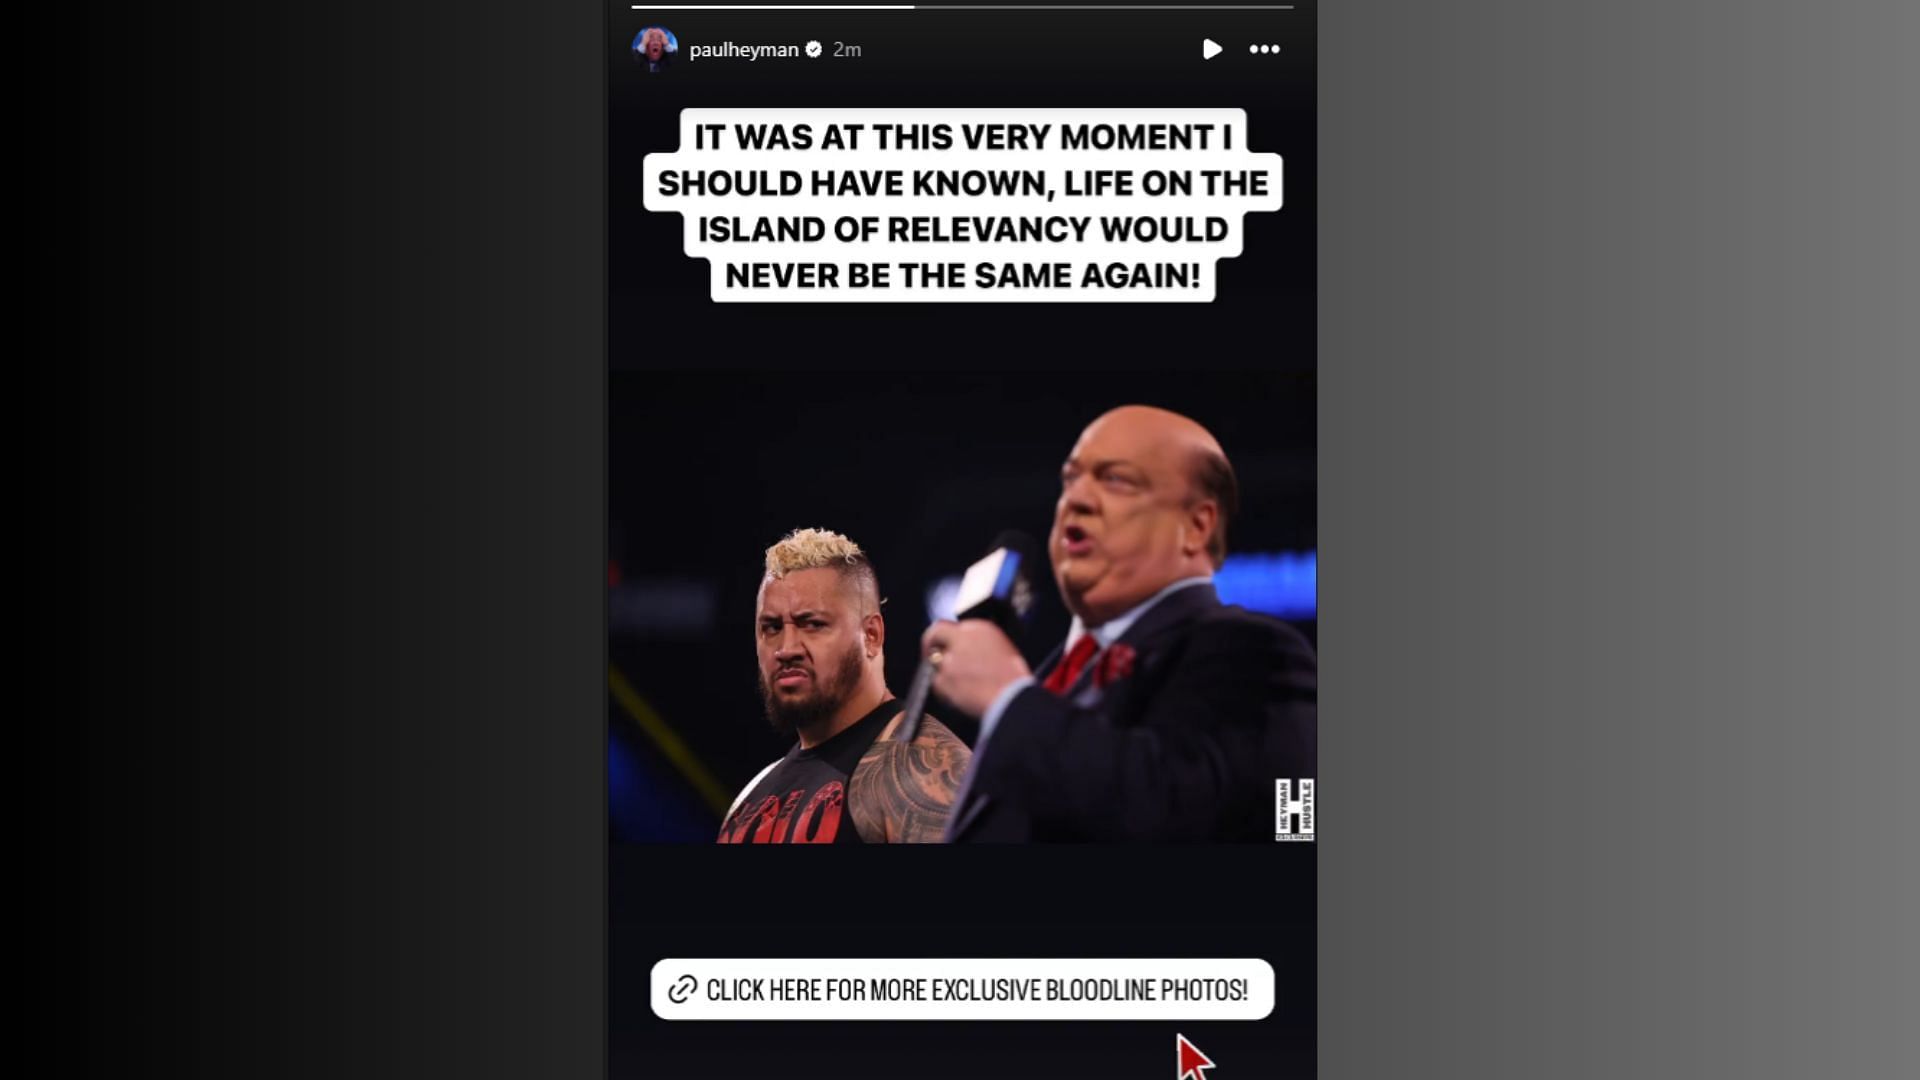 Paul Heyman posted about the moment online